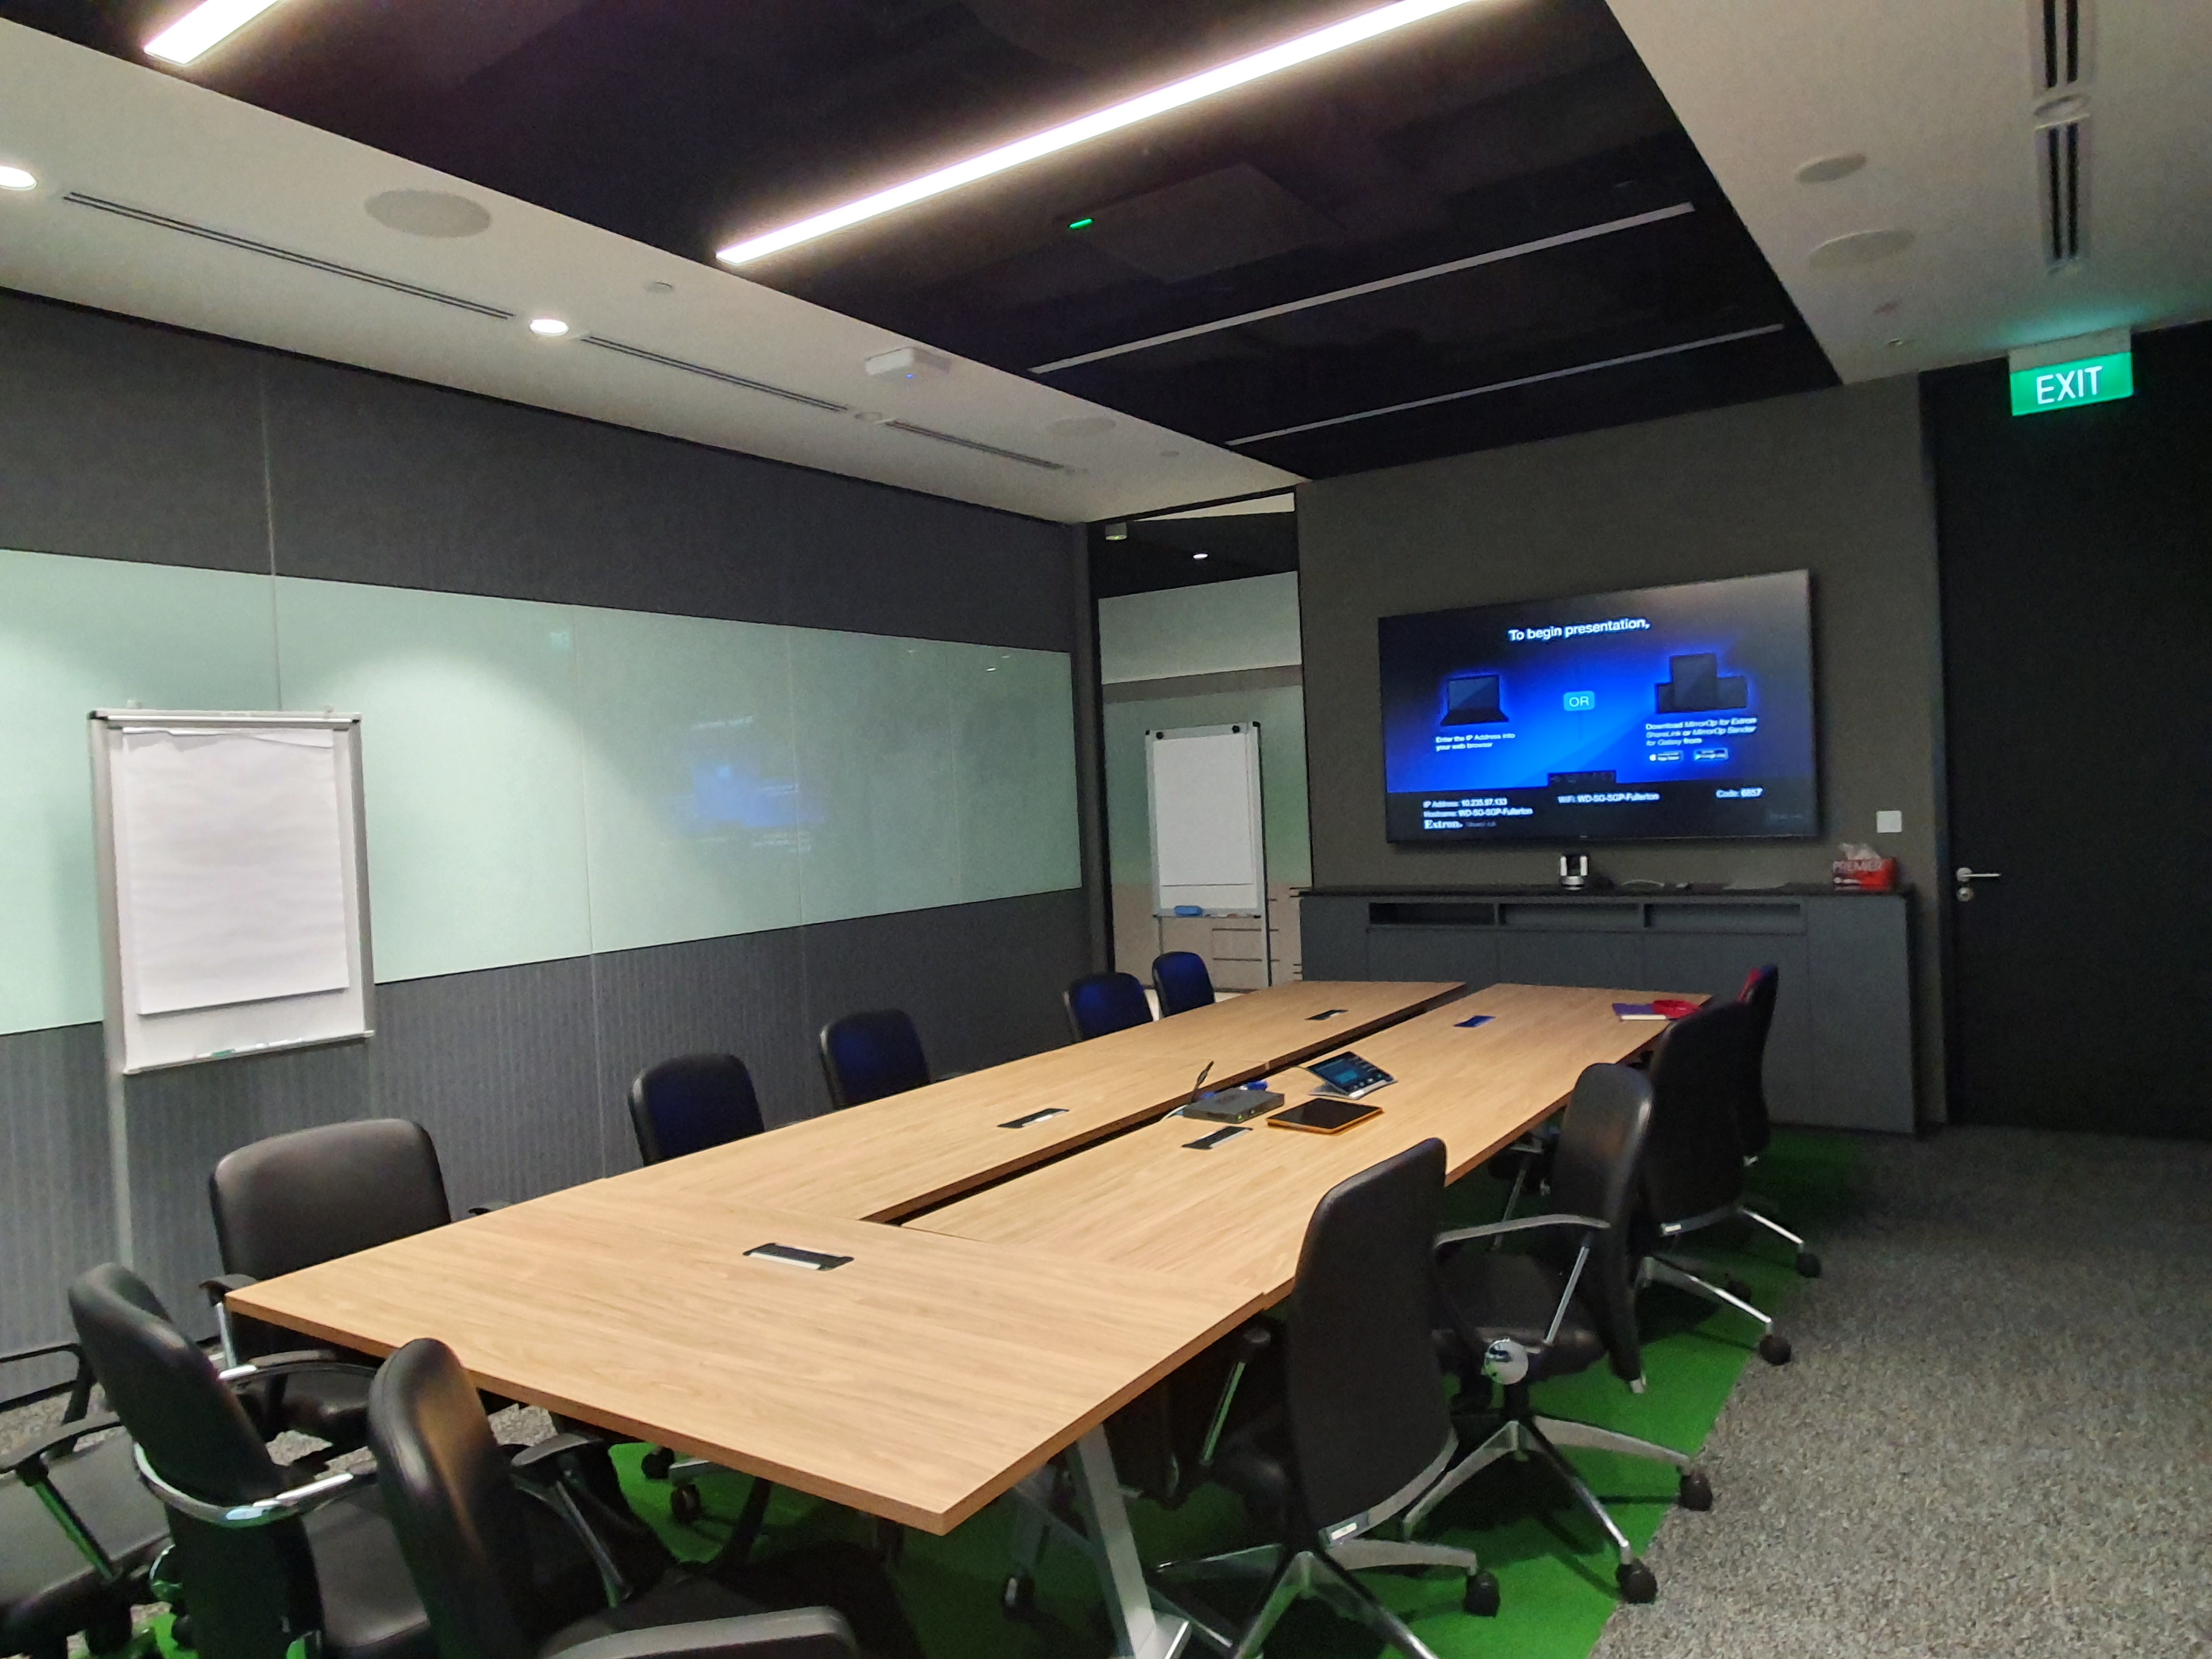 Schaeffler employees use transitions, logo keying, and other features that are standard with Extron DTP CrossPoint 4K scaling presentation matrix switchers to produce professional presentations.